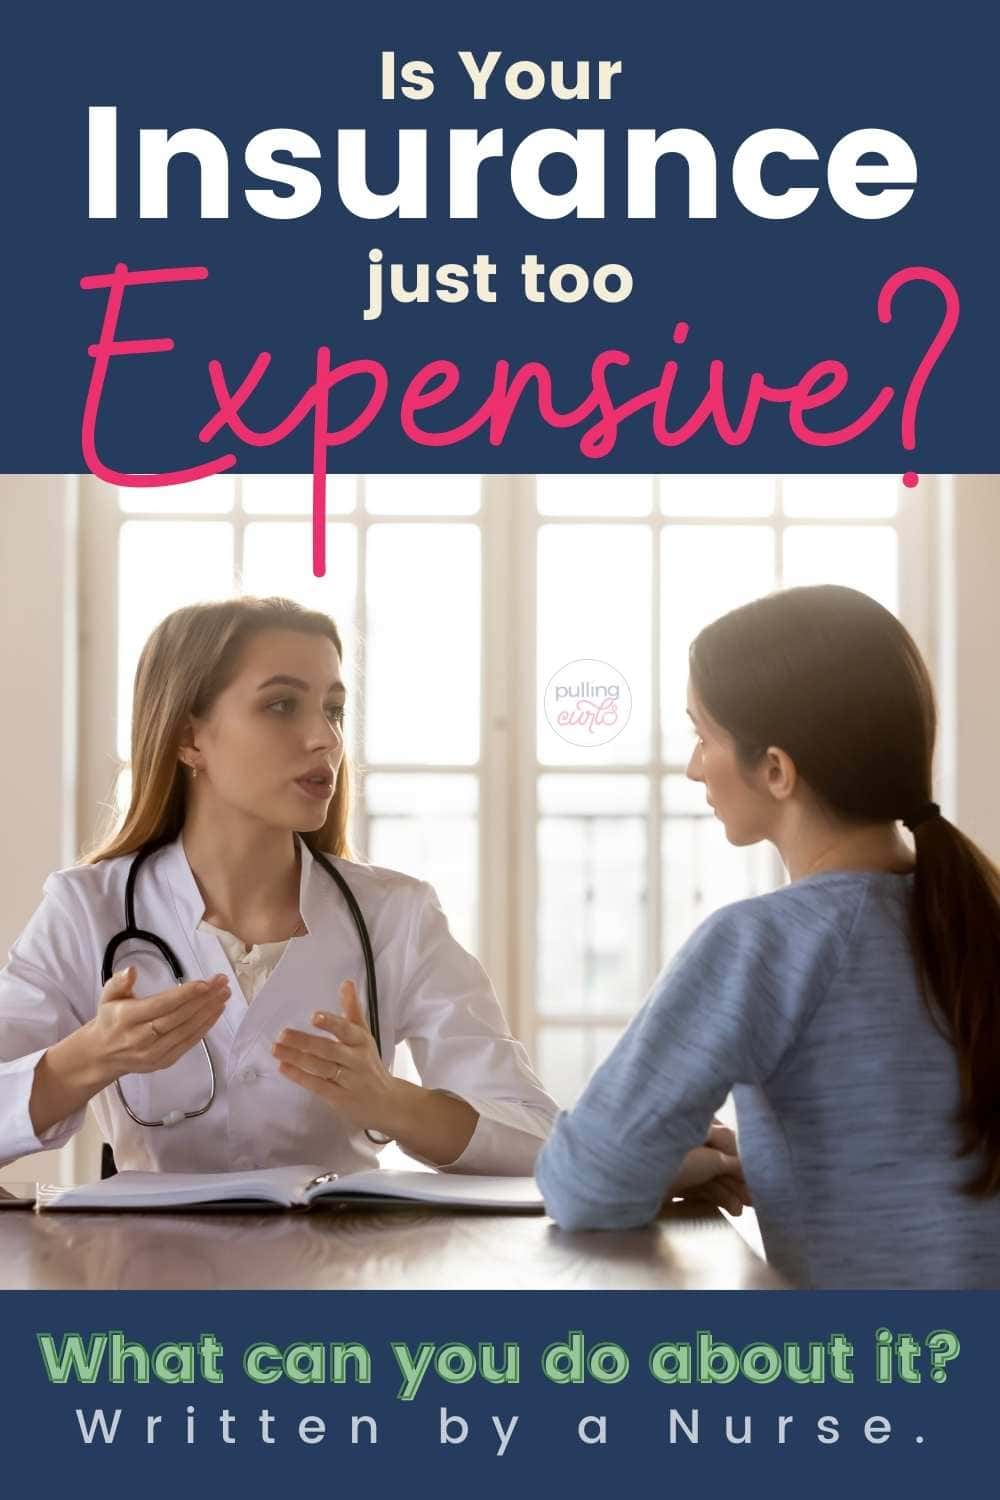 woman and her doctor / is you health insurance too expensive? via @pullingcurls